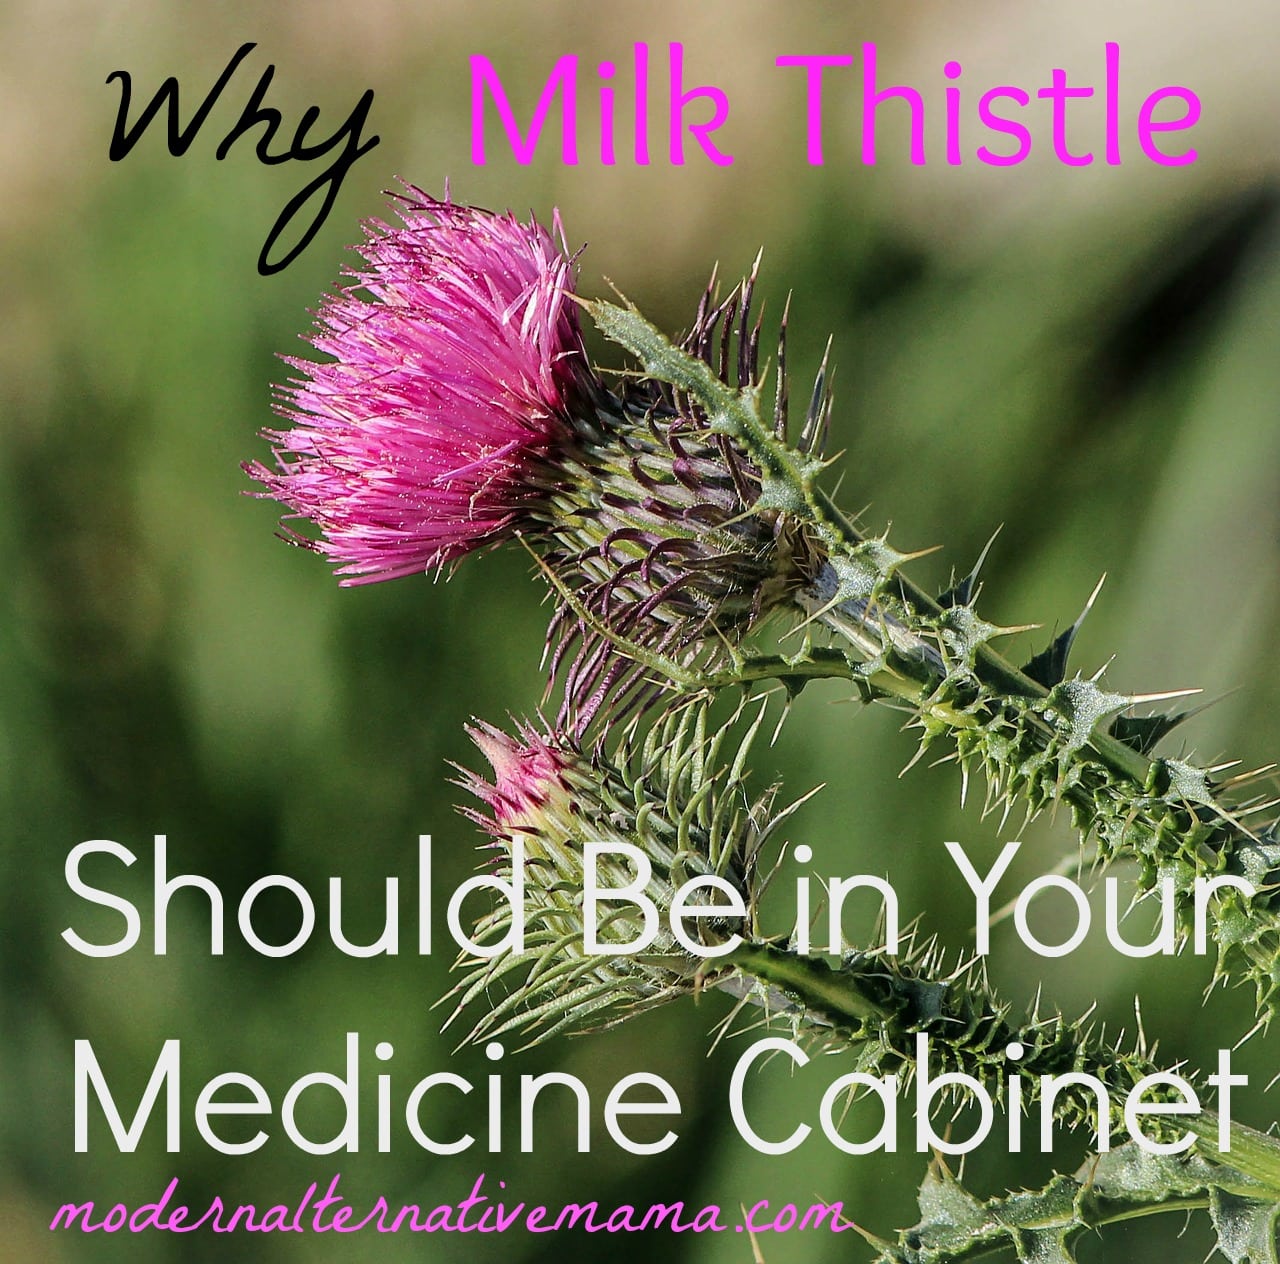 Why Milk Thistle Should Be in Your Medicine Cabinet